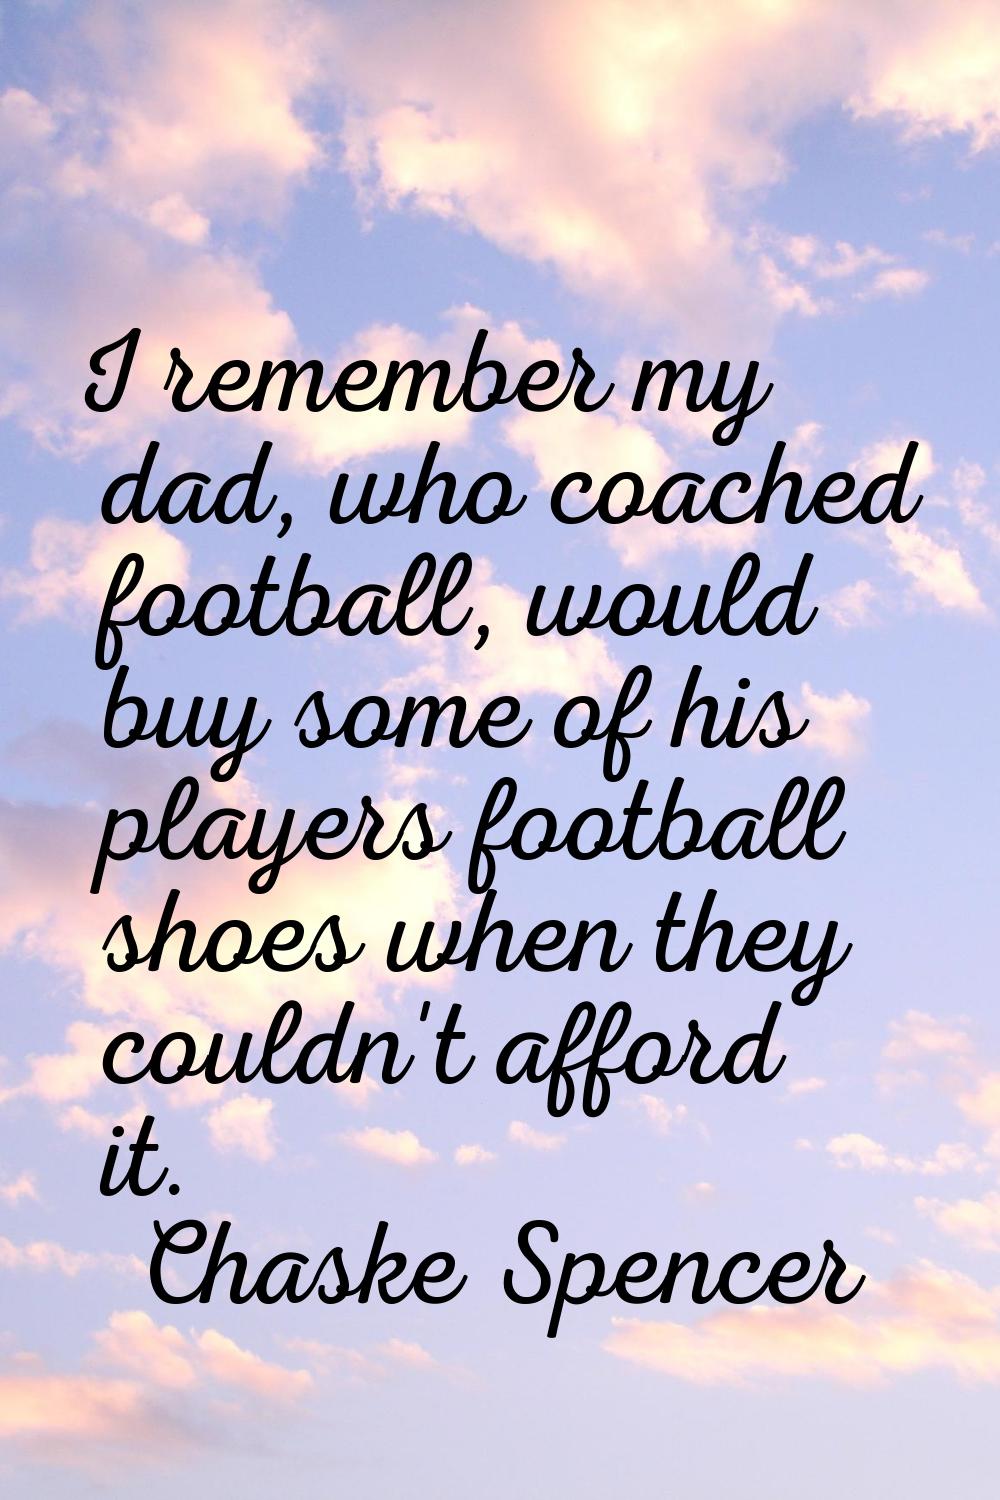 I remember my dad, who coached football, would buy some of his players football shoes when they cou